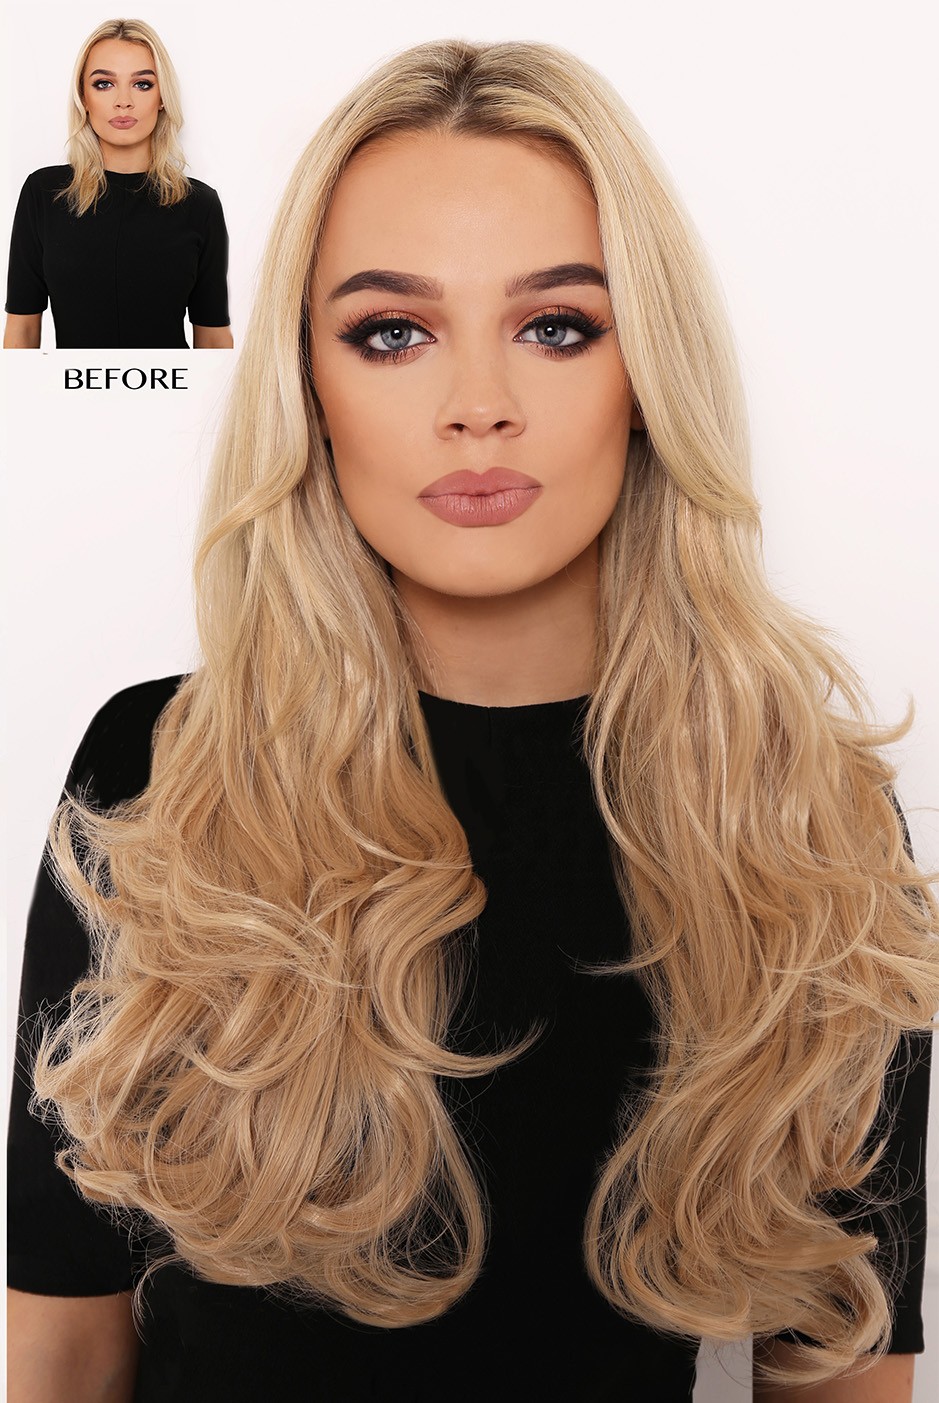 Lullabellz Double Thick Layered Curly Hair Extensions